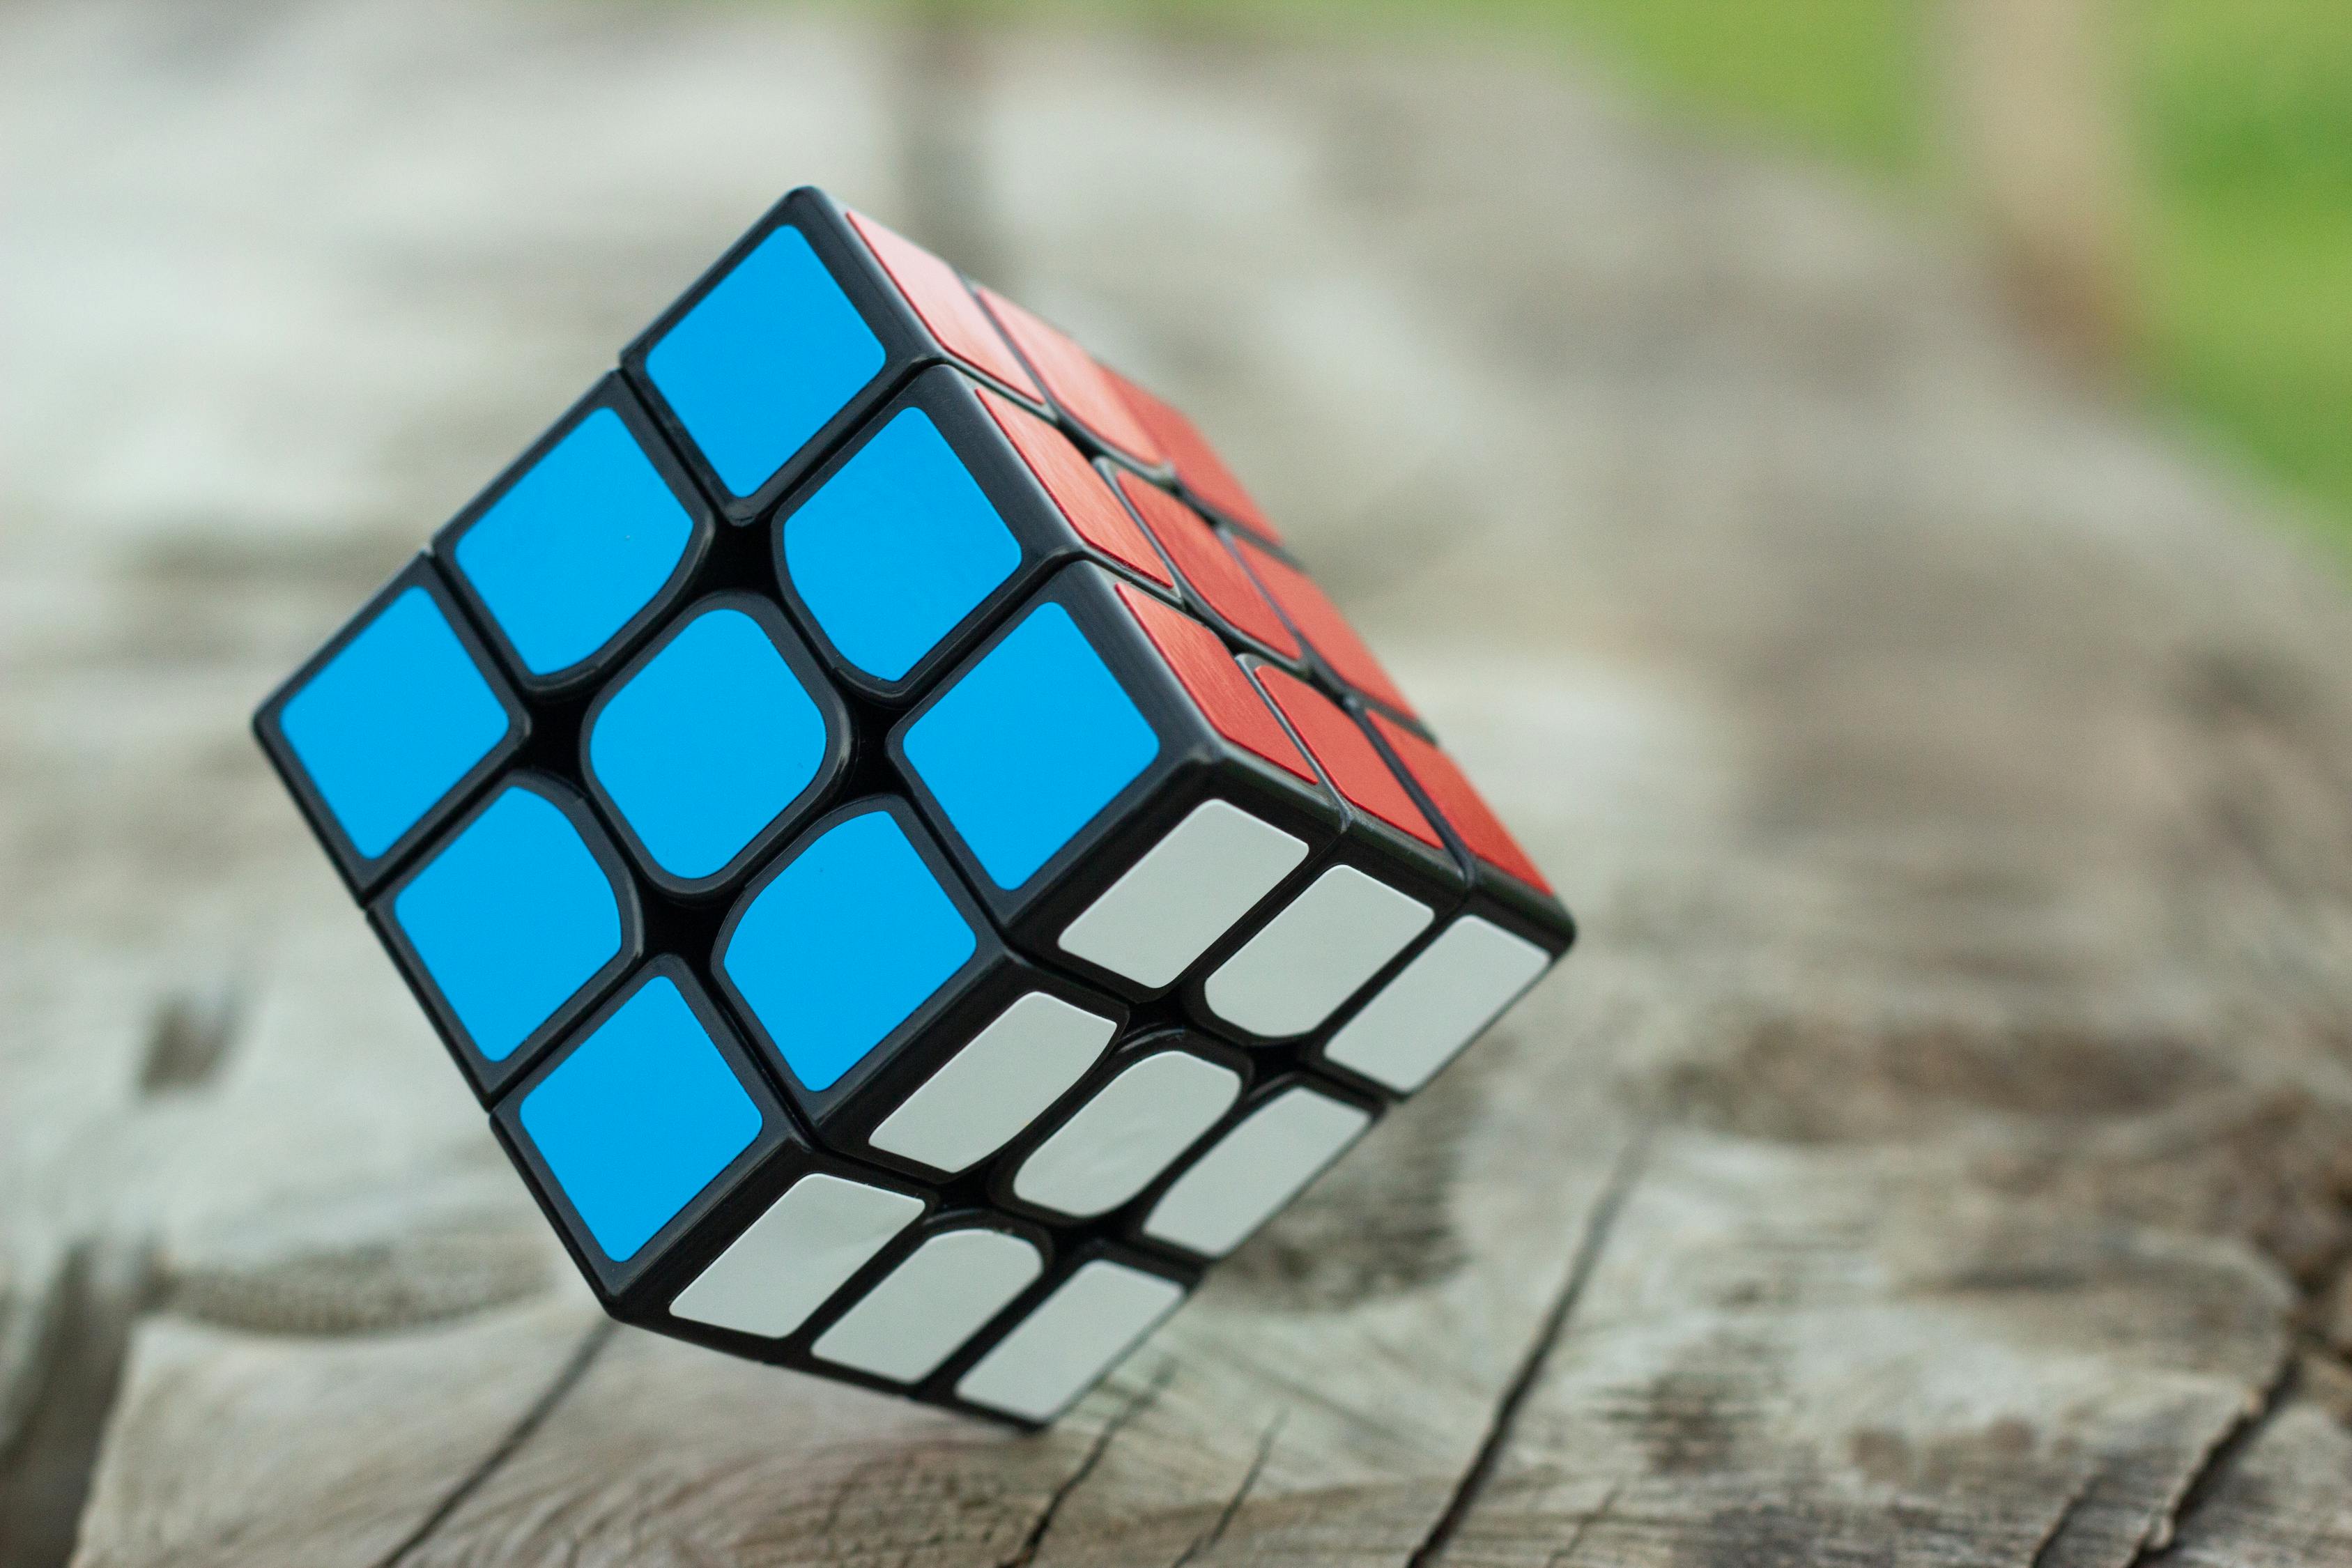 3 By 3 Rubiks Cube Selective Focus Photography · Free Stock Photo